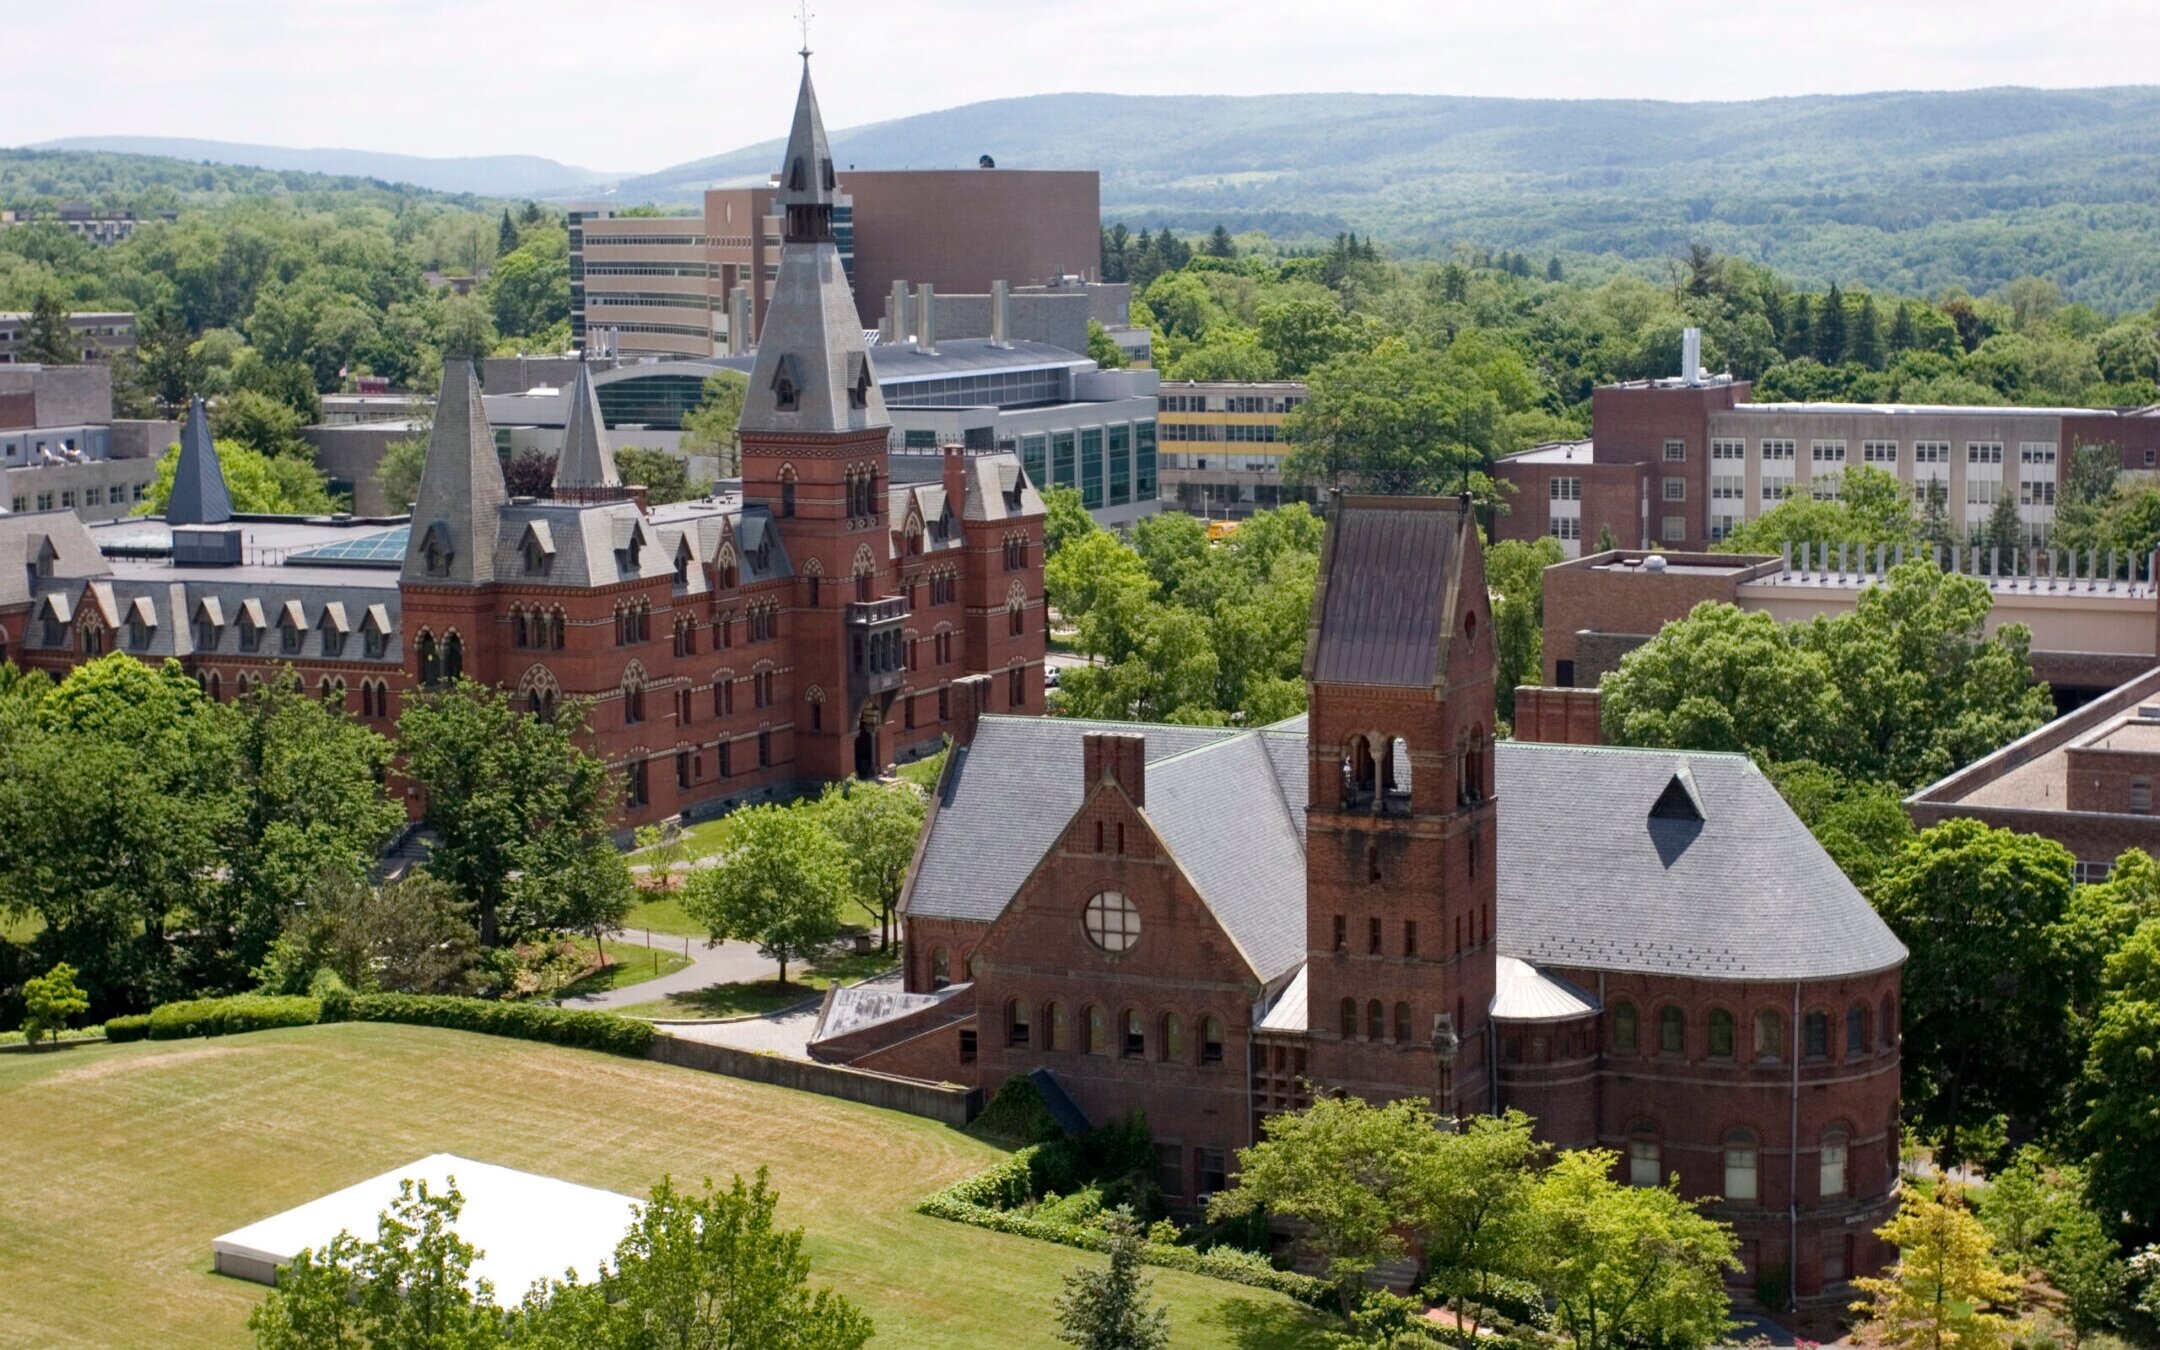 Cornell University buildings viewed from McGraw Tower. (Getty Images)